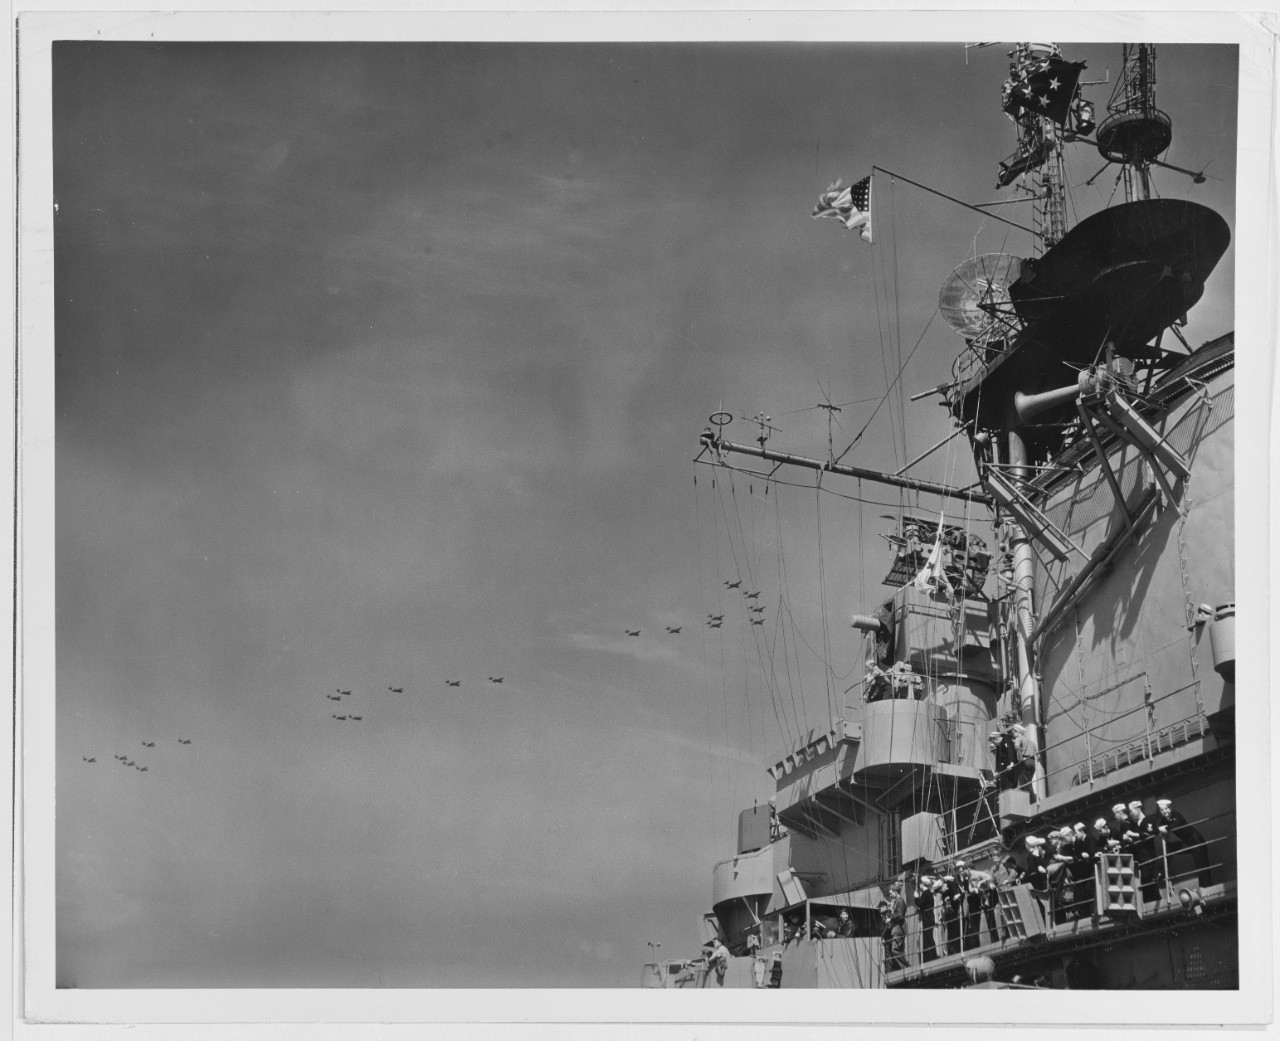 Air Group Flying in Review over USS RANDOLPH (CV-15)